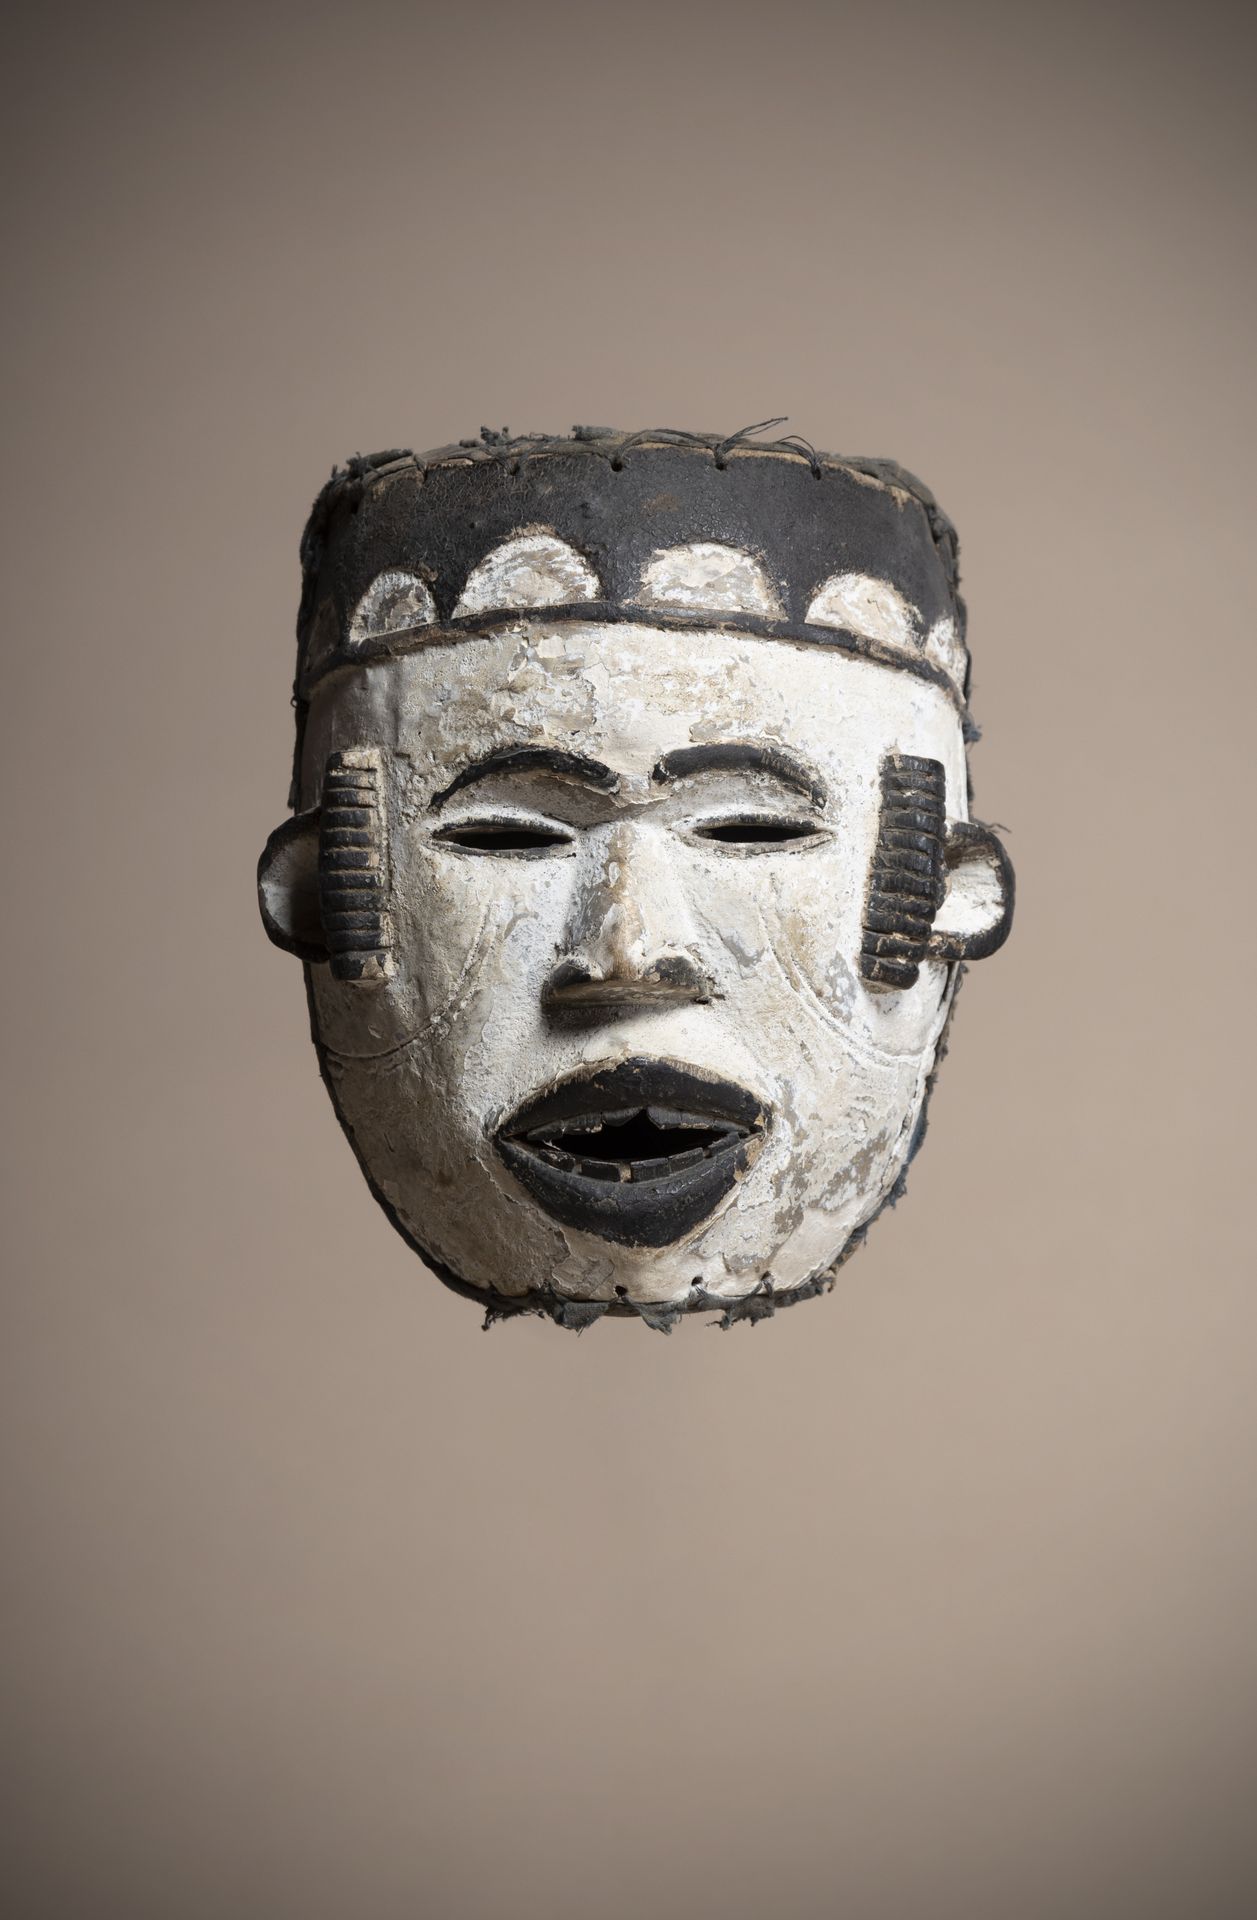 Null IDOMA (Nigeria)

White facial mask with raised temporal scarification marks&hellip;